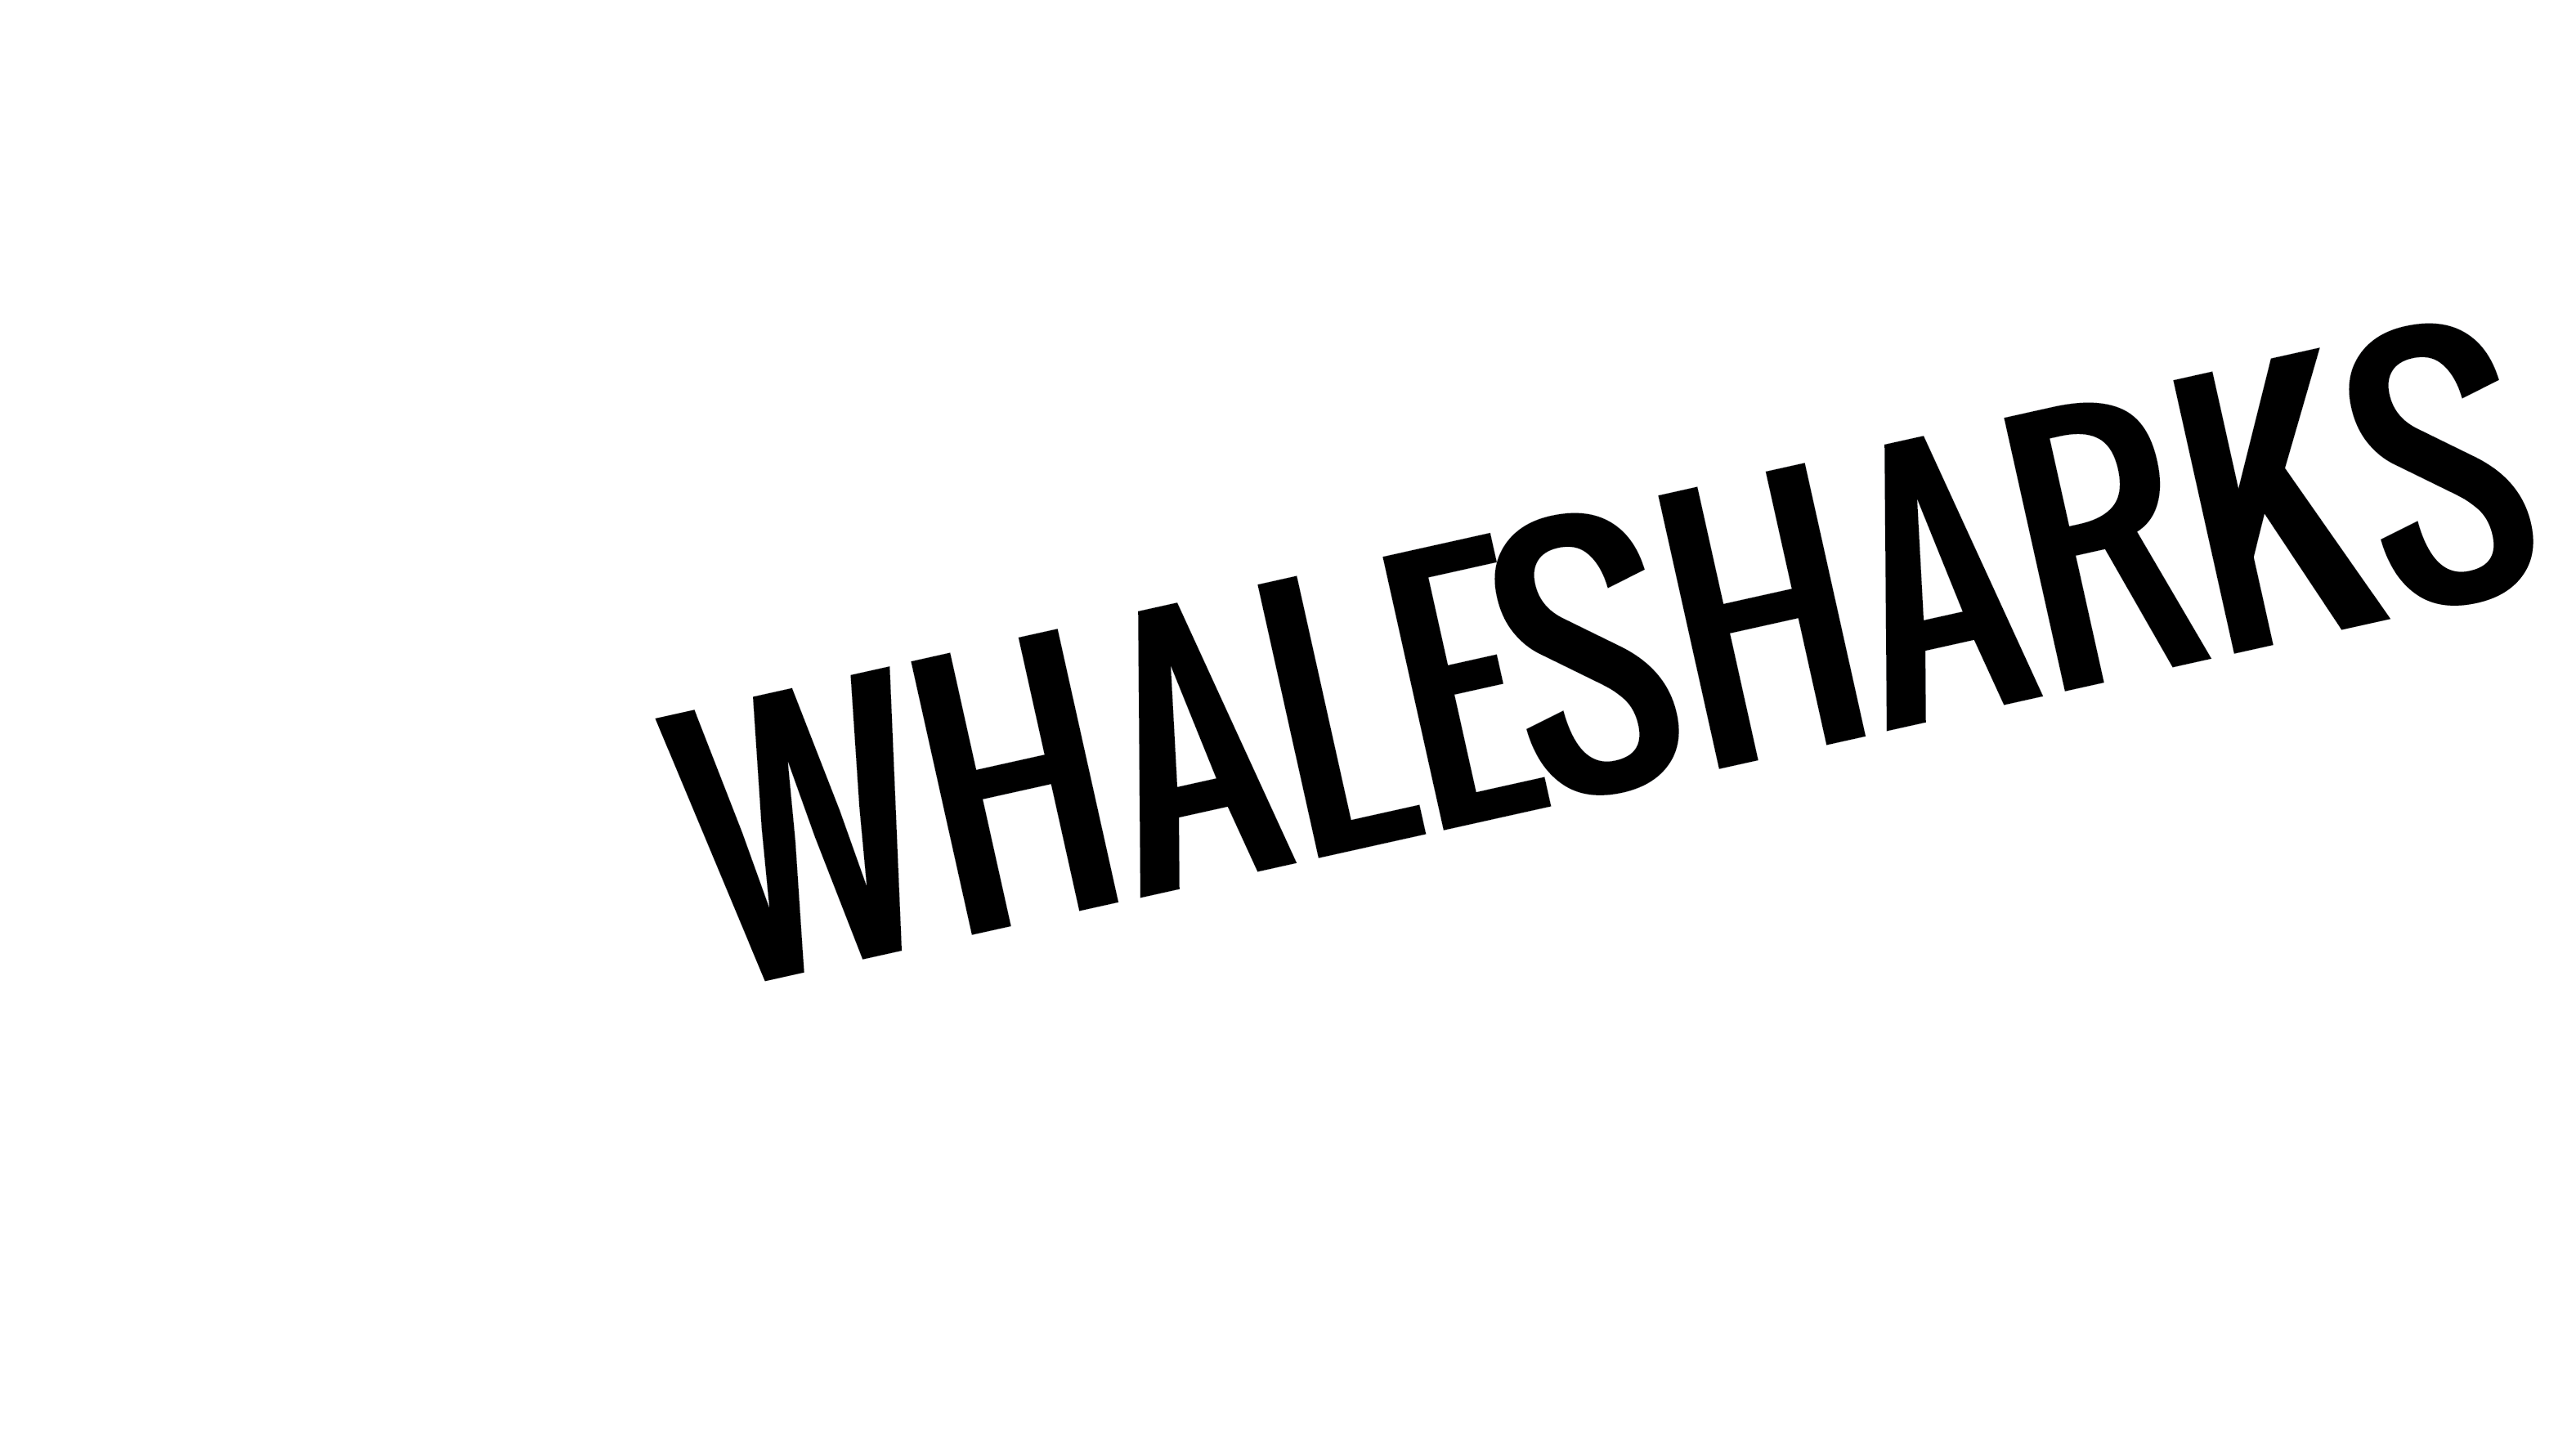 Save the Whalesharks